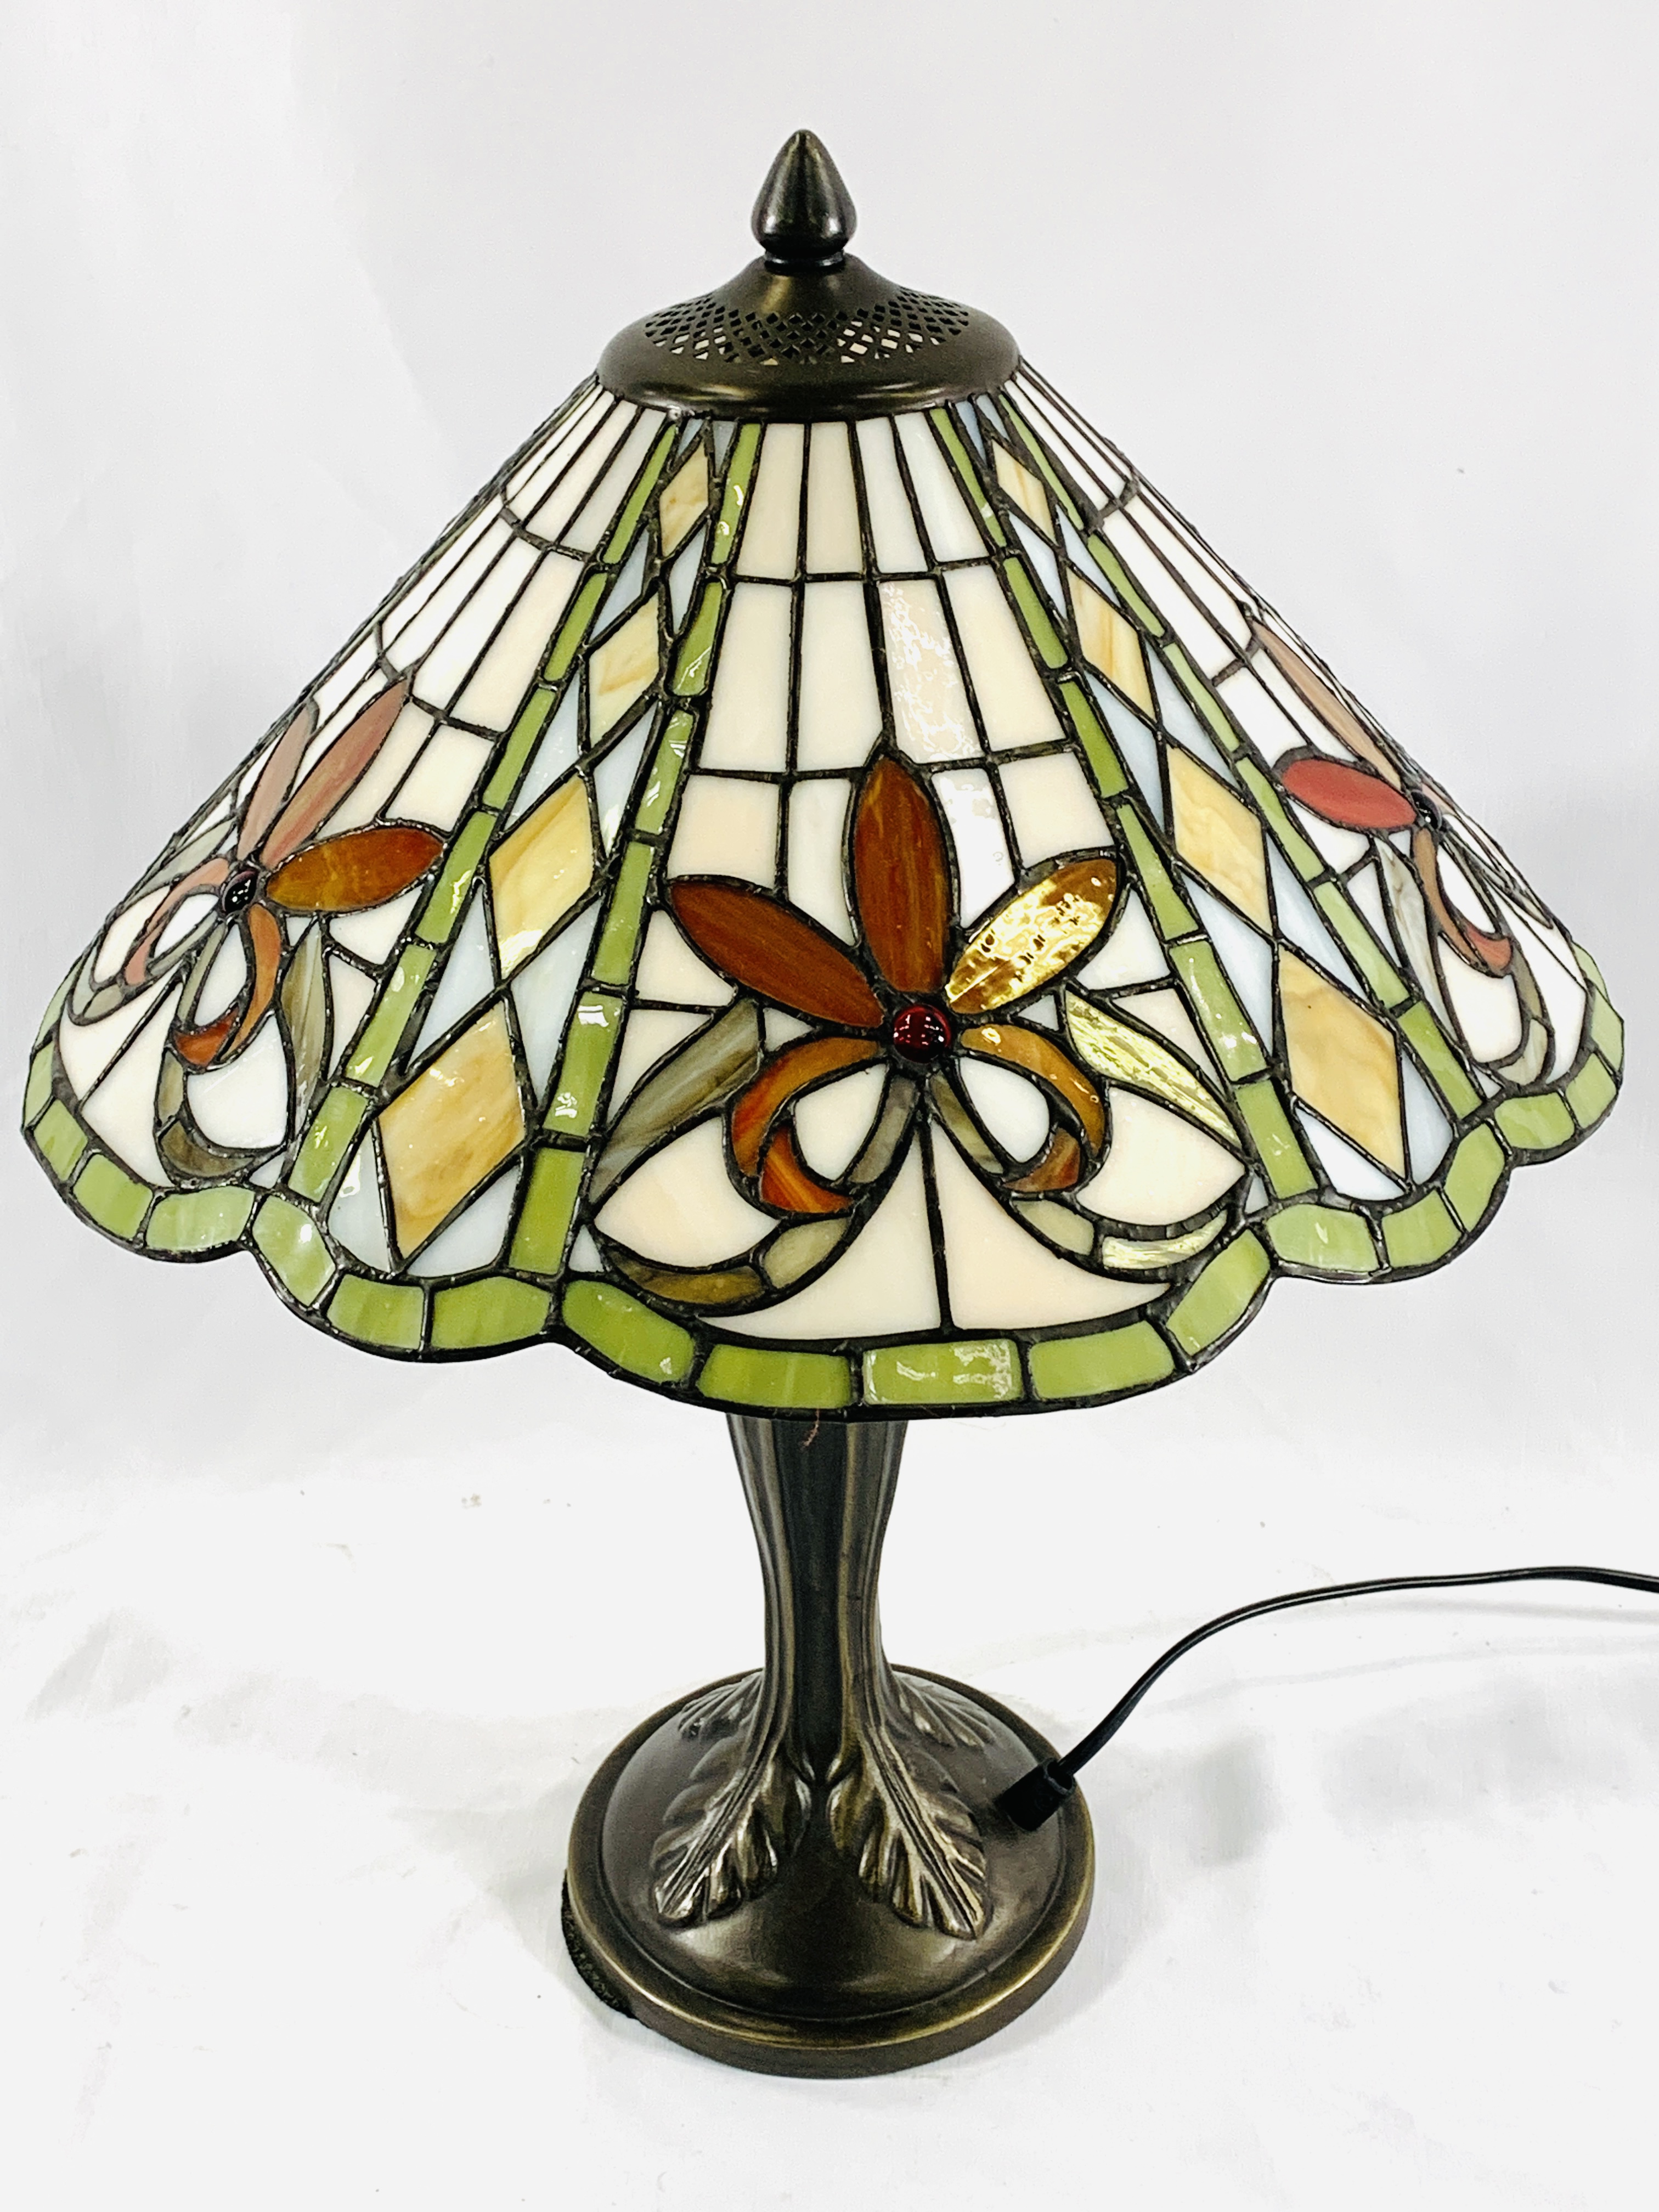 Tiffany style table lamp - Image 3 of 3